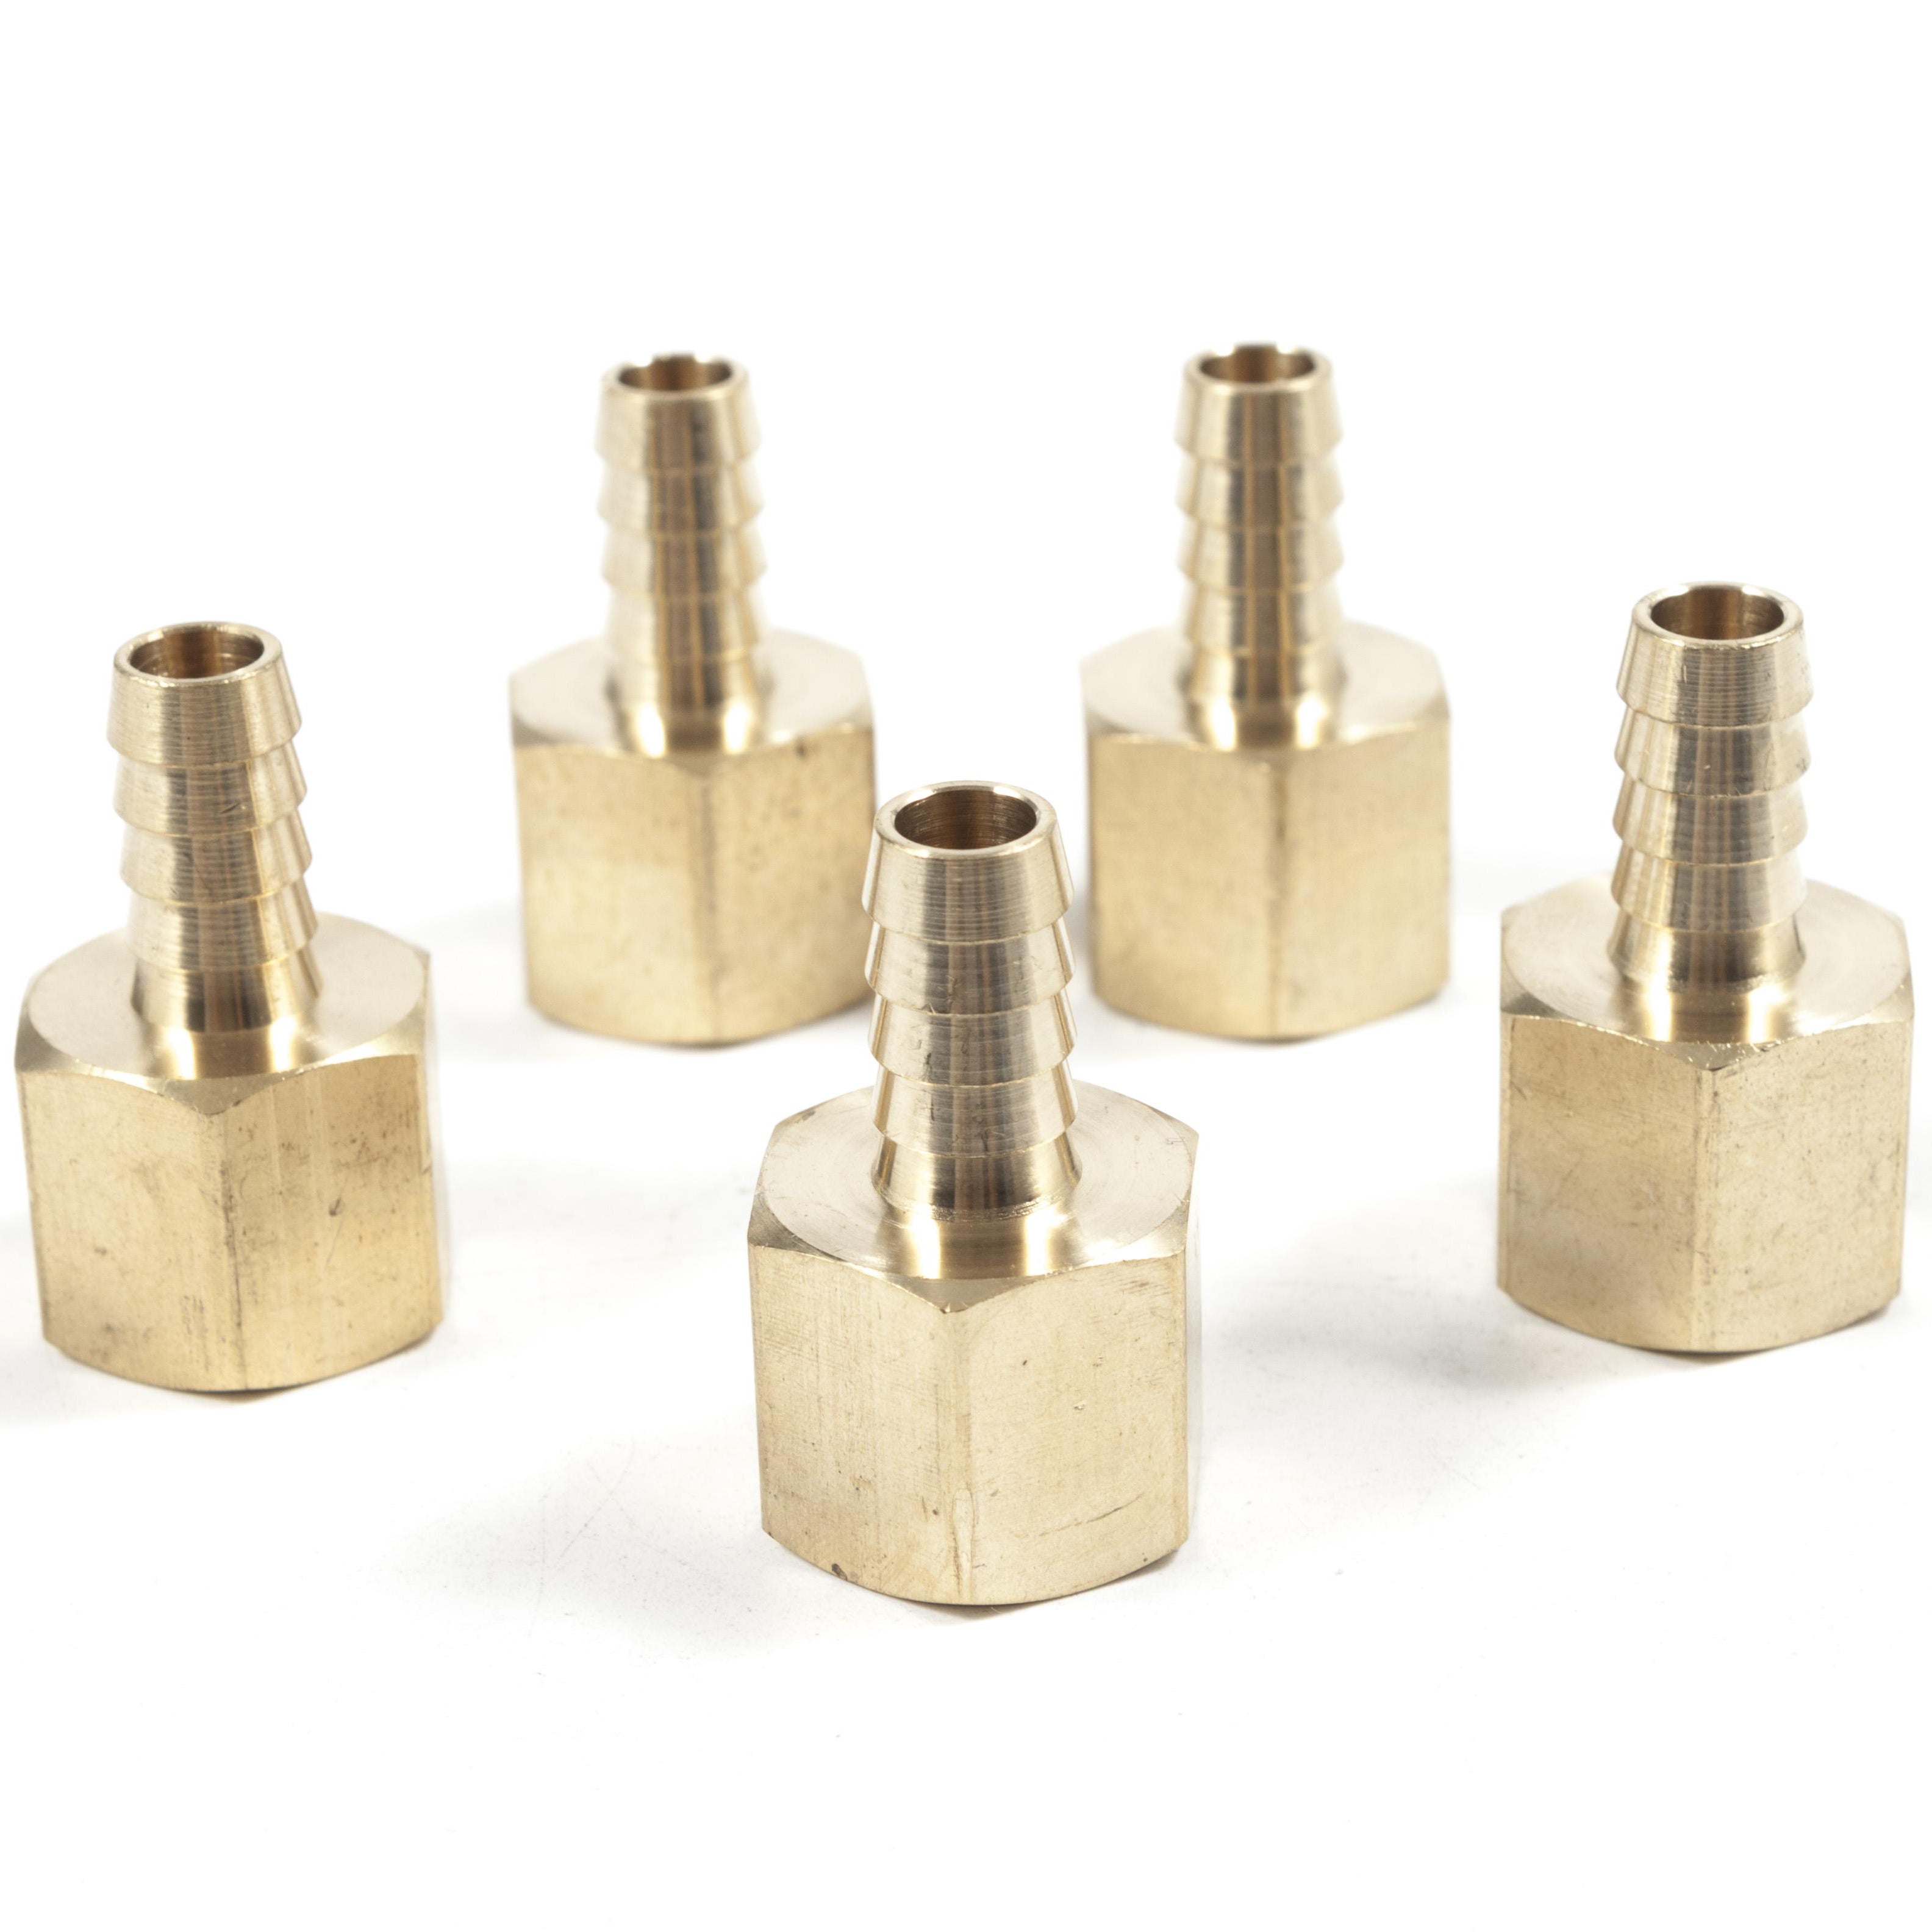 LTWFITTING Brass Fitting Coupler 3/8-Inch Hose ID x 1/2-Inch Female NPT Fuel Water Gas(Pack of 5)